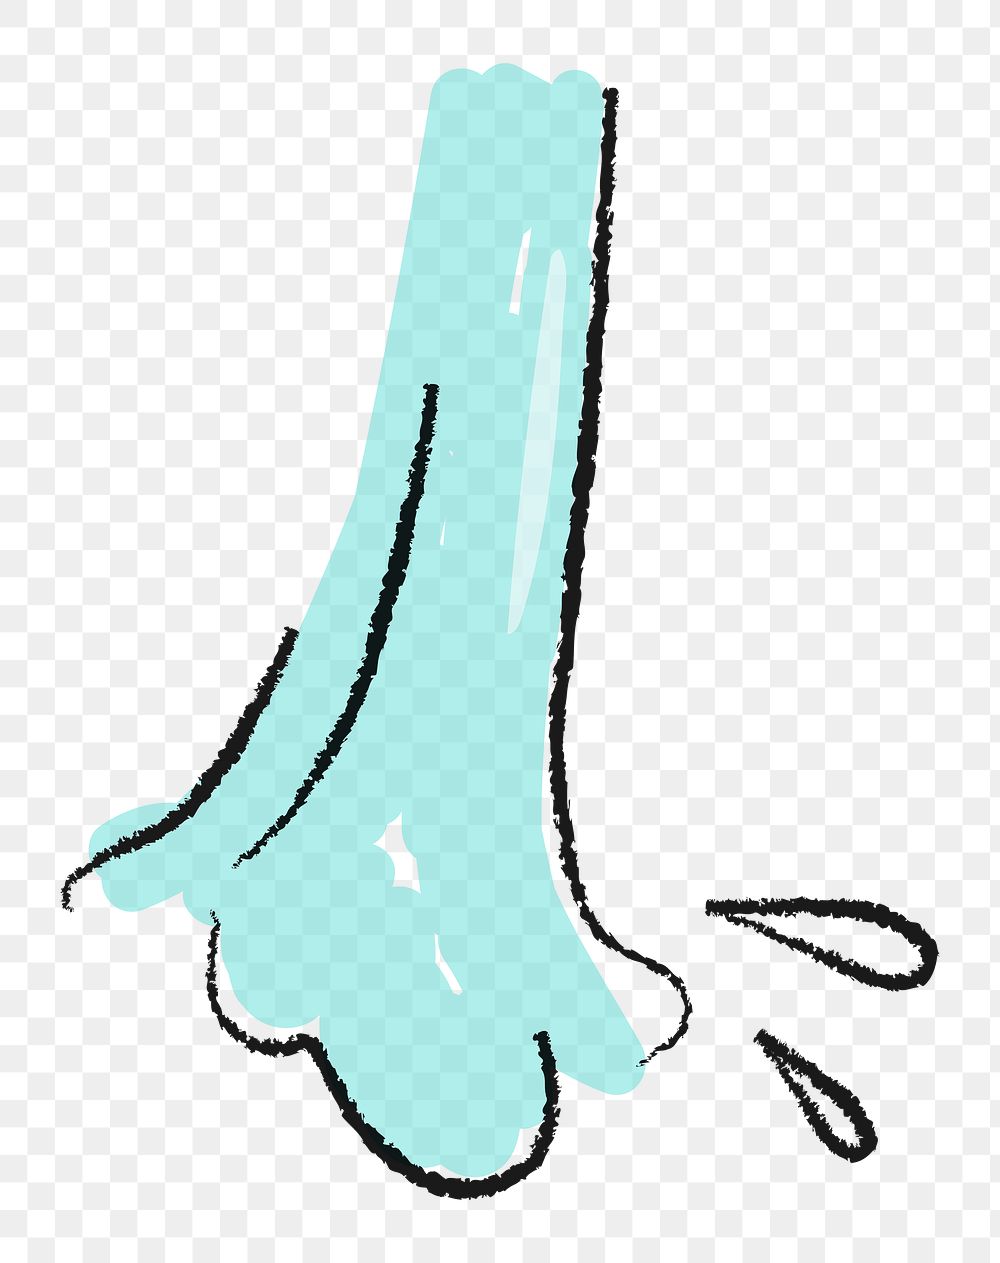 Running water png sticker, doodle on transparent background